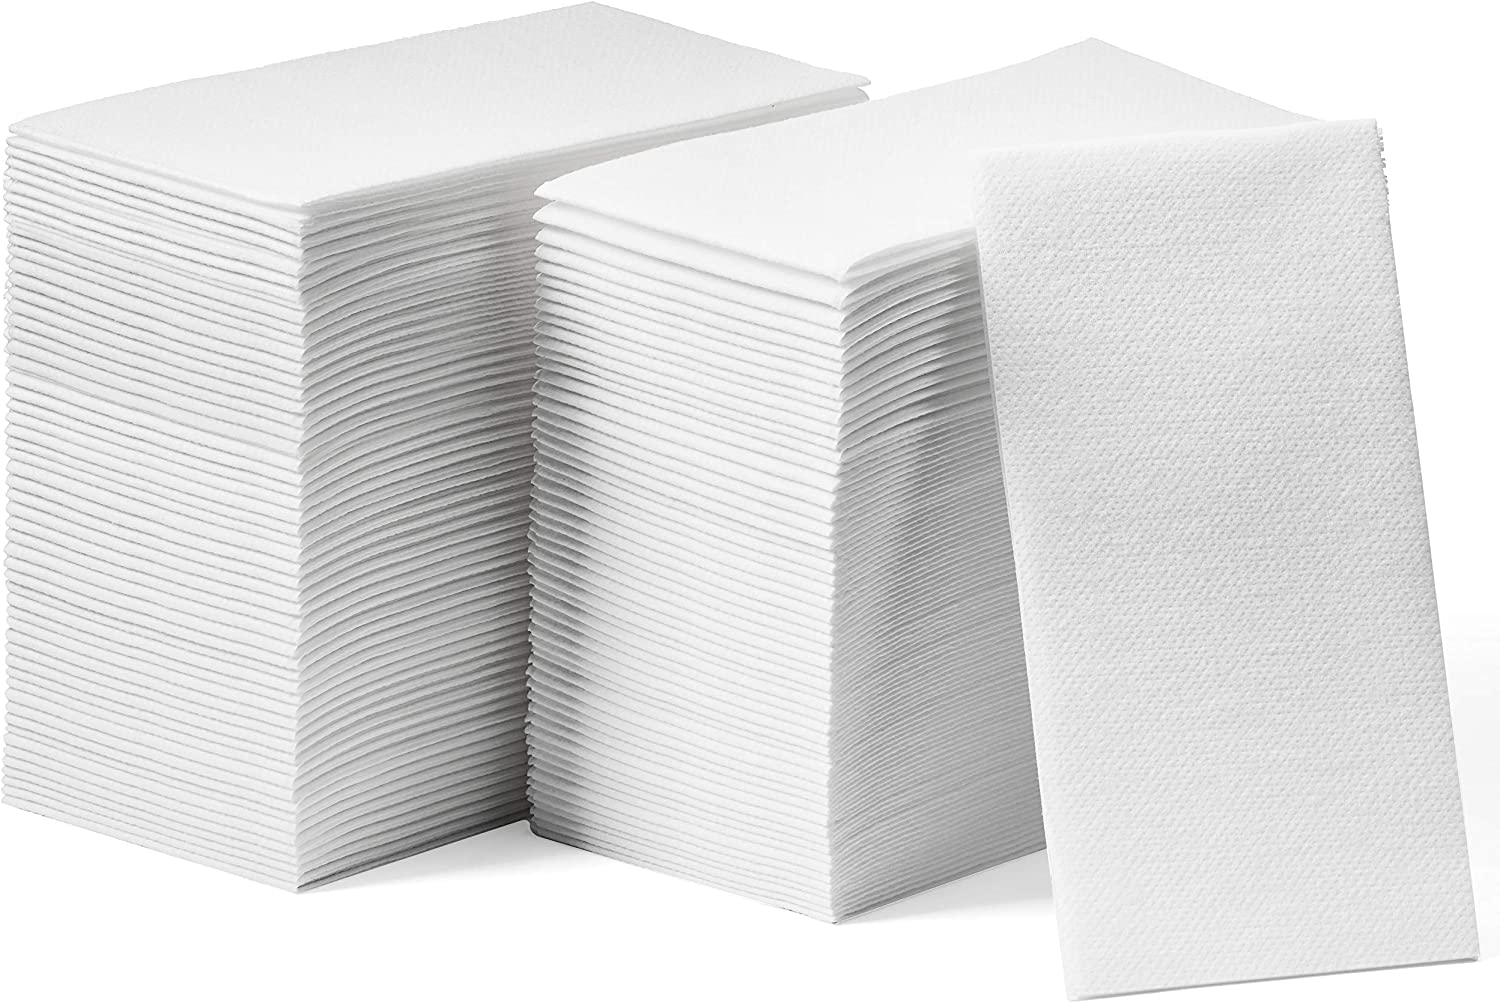 200 PACK Guest Towels Disposable Bathroom, Soft and Linen-Like